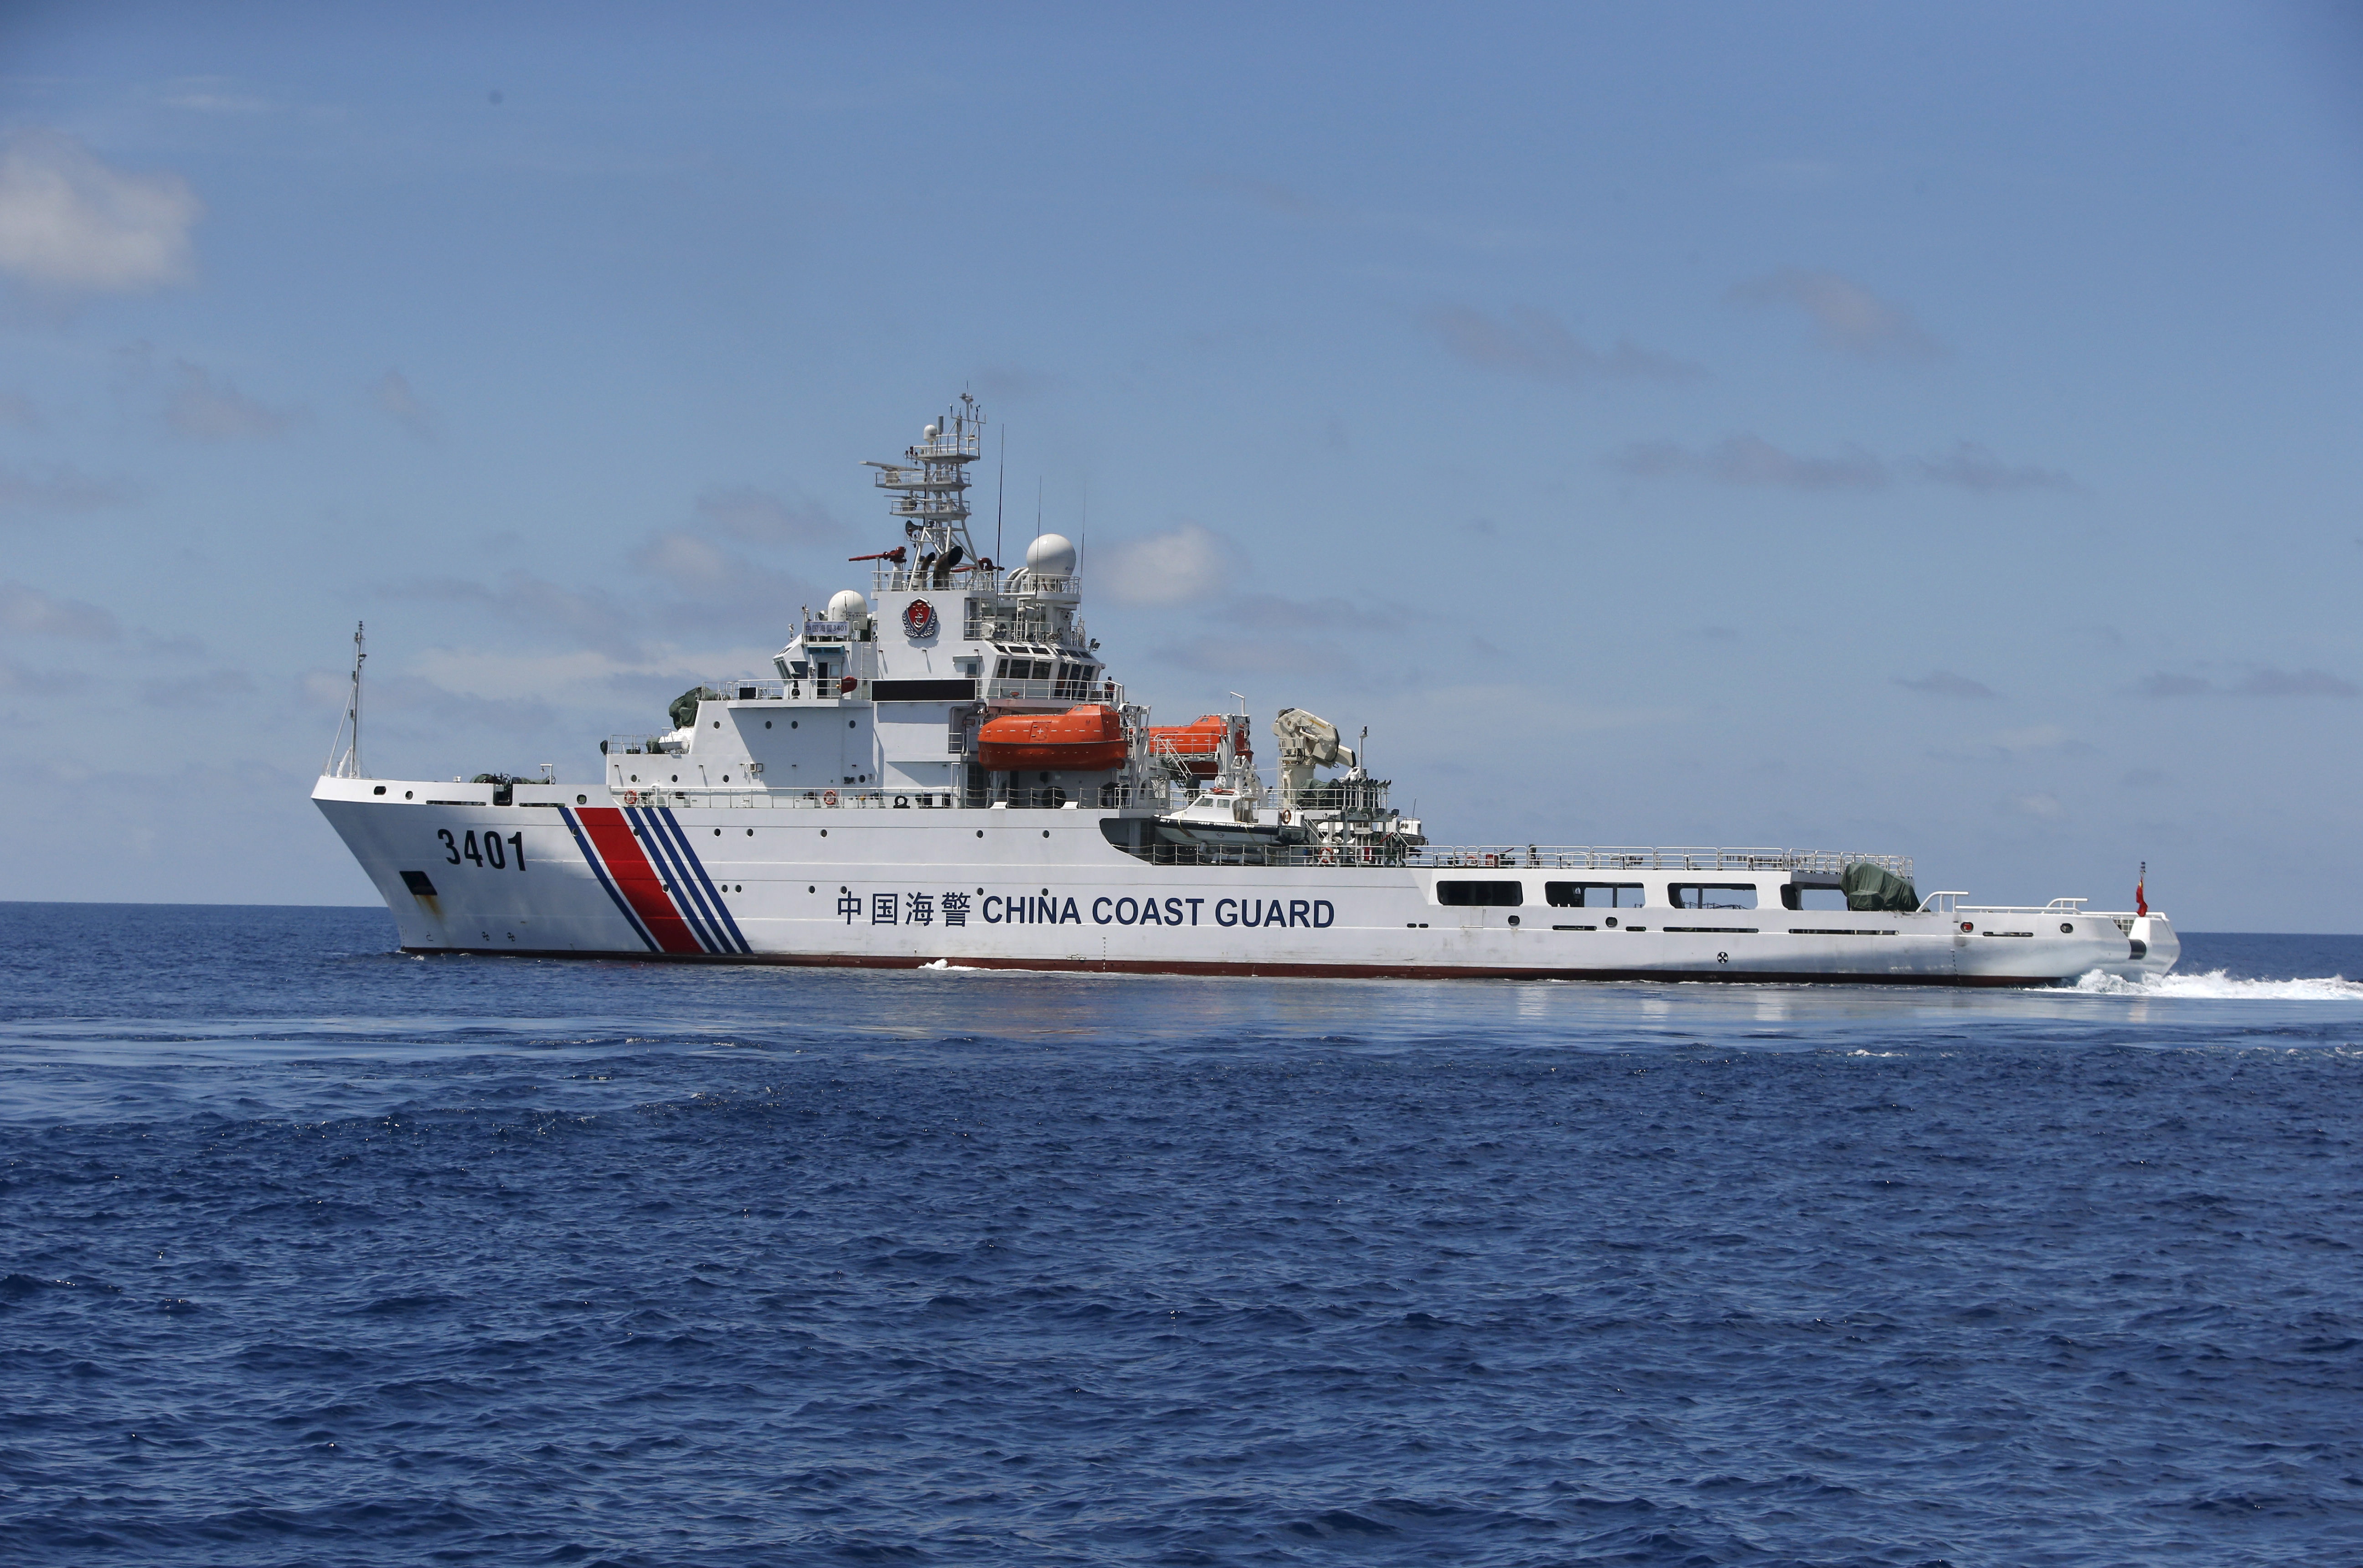 A Chinese Coast Guard vessel on the disputed Second Thomas Shoal, part of the Spratly Islands, in the South China Sea on 29 March 2014. © Erik De Castro via Reuters